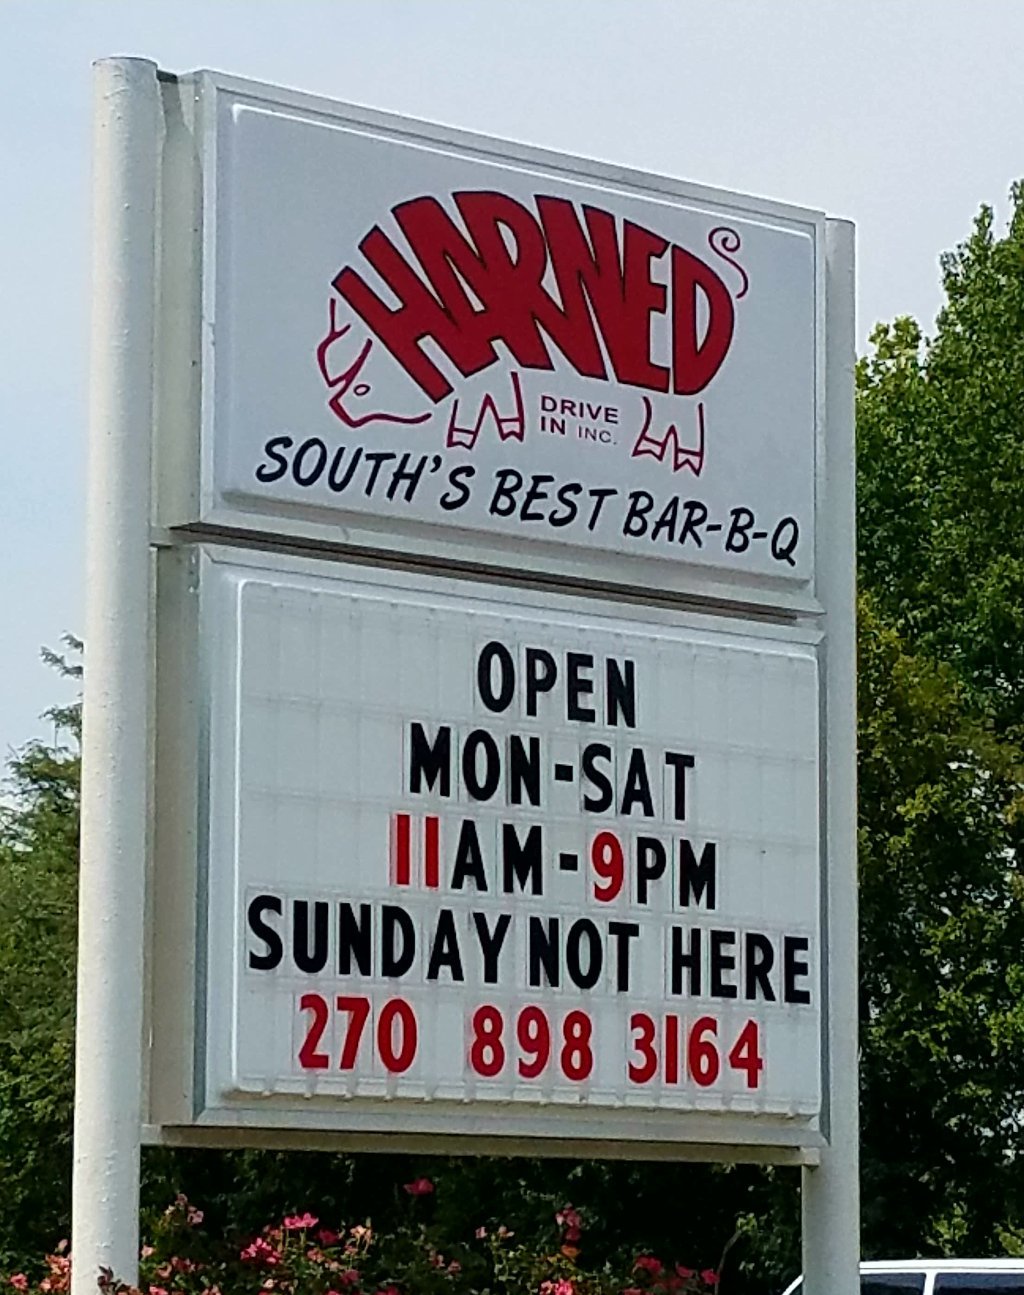 Harned`s Drive In